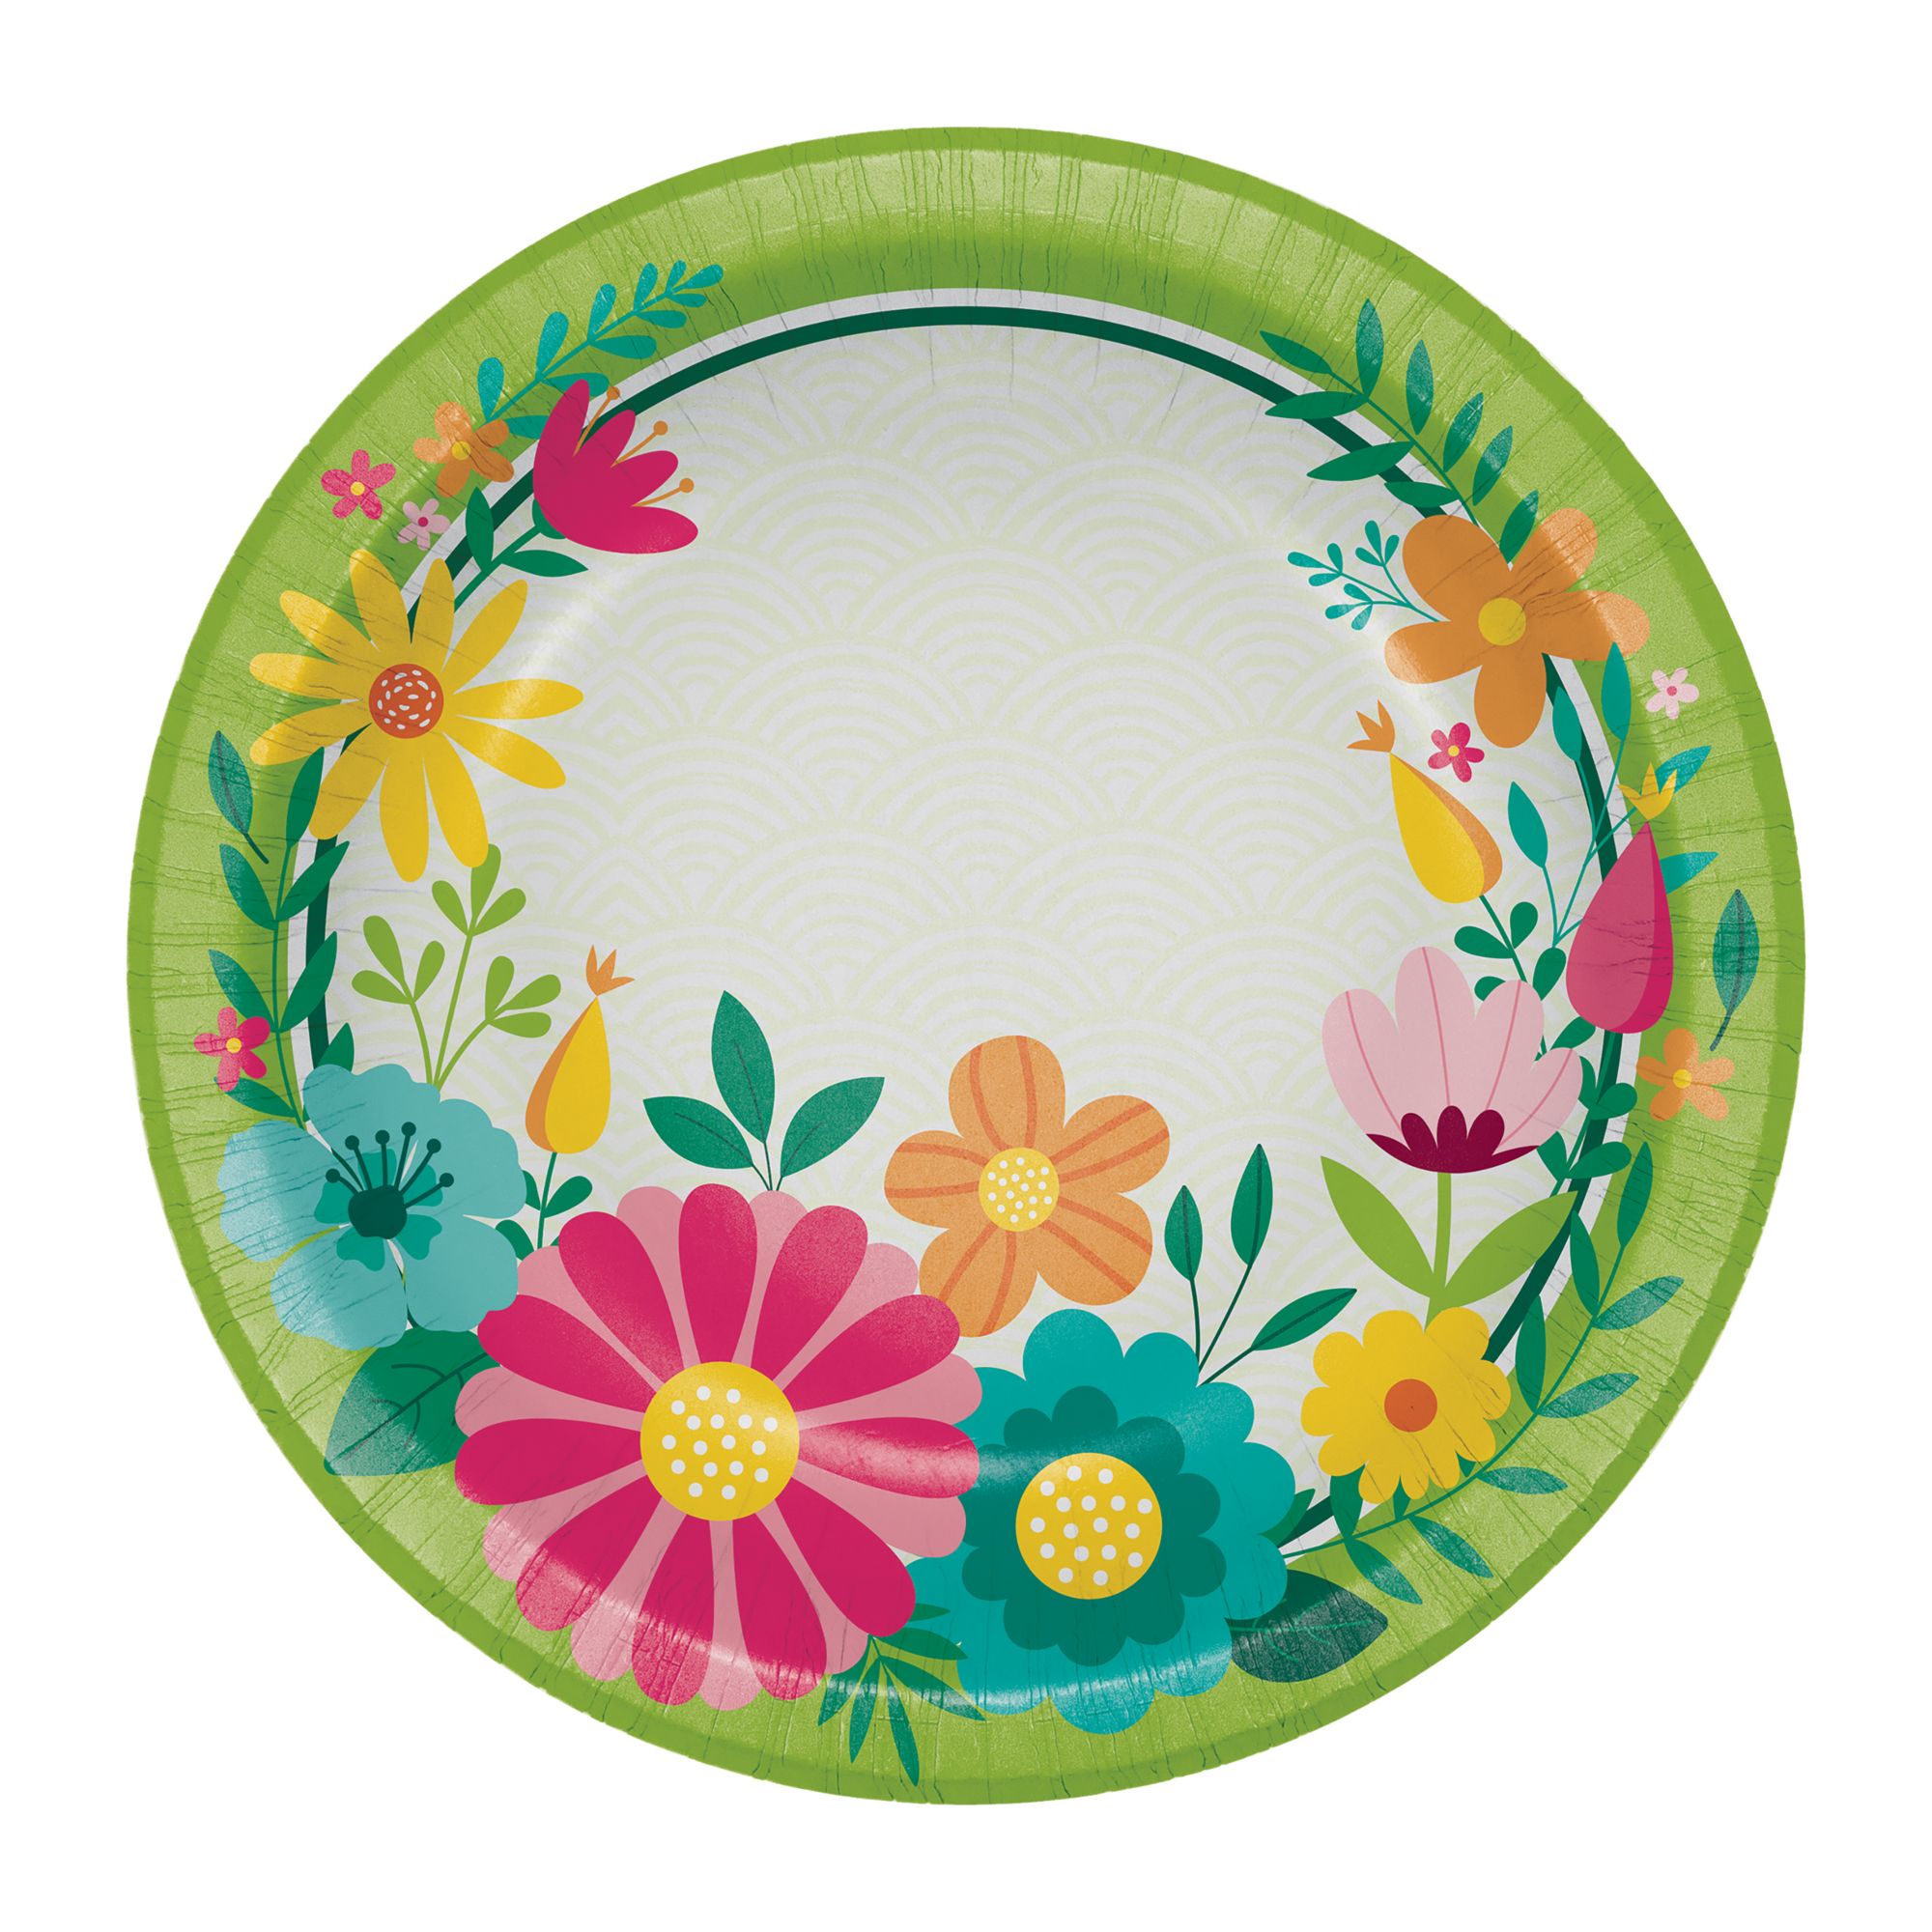 Set of 8 Floral Bumblebee Small Disposable Paper Plates 7 Inch Diameter  from Primitives by Kathy - Cherryland Sales